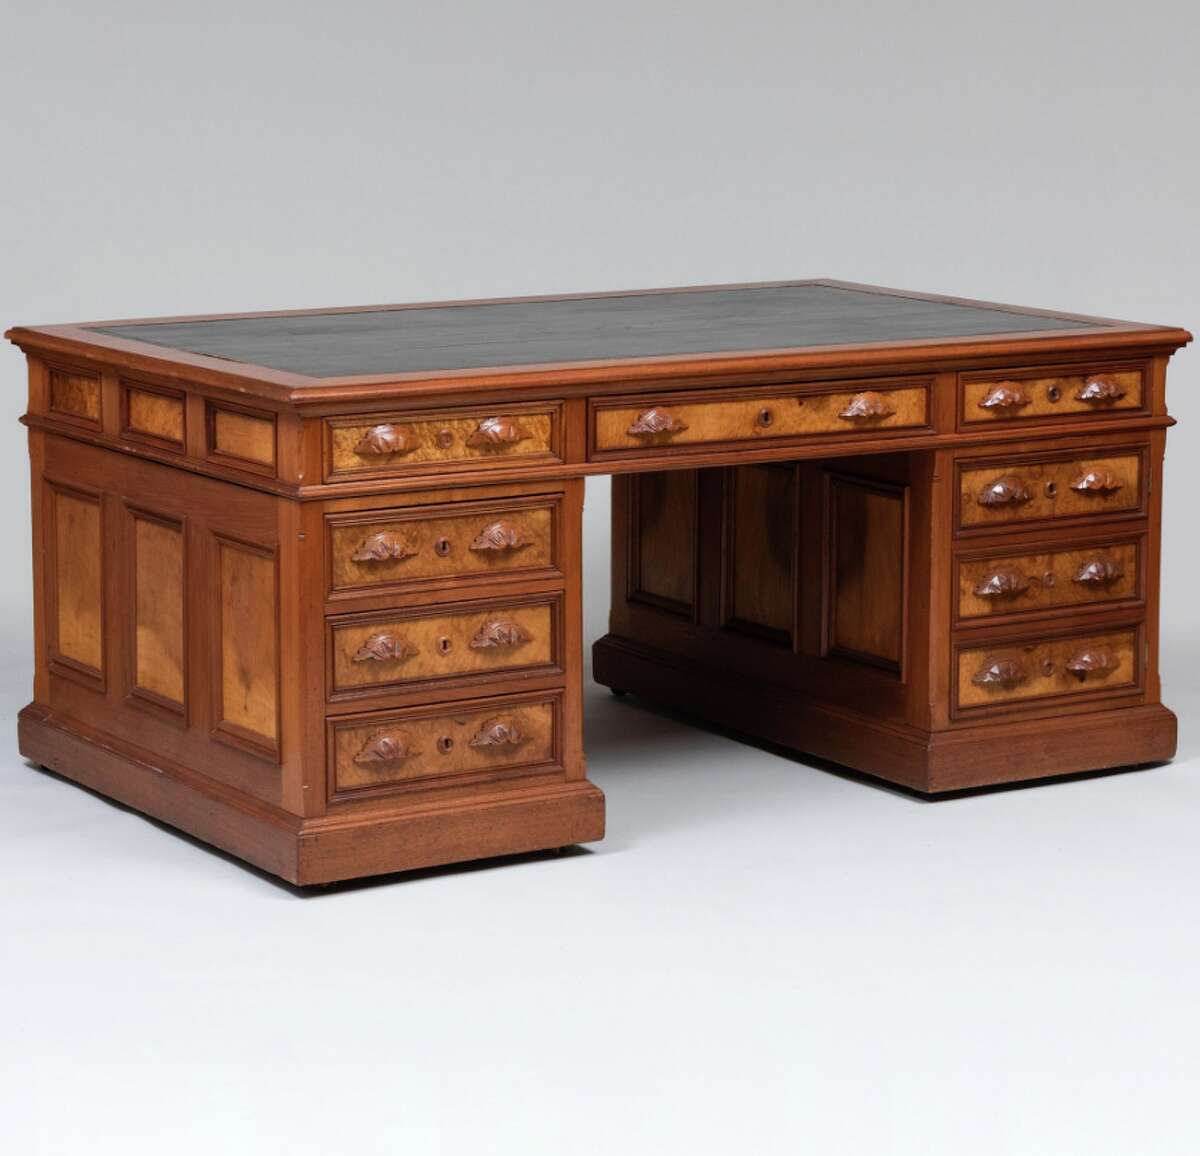 An ornate partners’ desk Didion and her husband, John Dunne, brought from California. The desk was made by John Breuner, a German cabinet maker who opened a store in Sacramento in 1856. The desk was originally purchased by Didion’s parents.